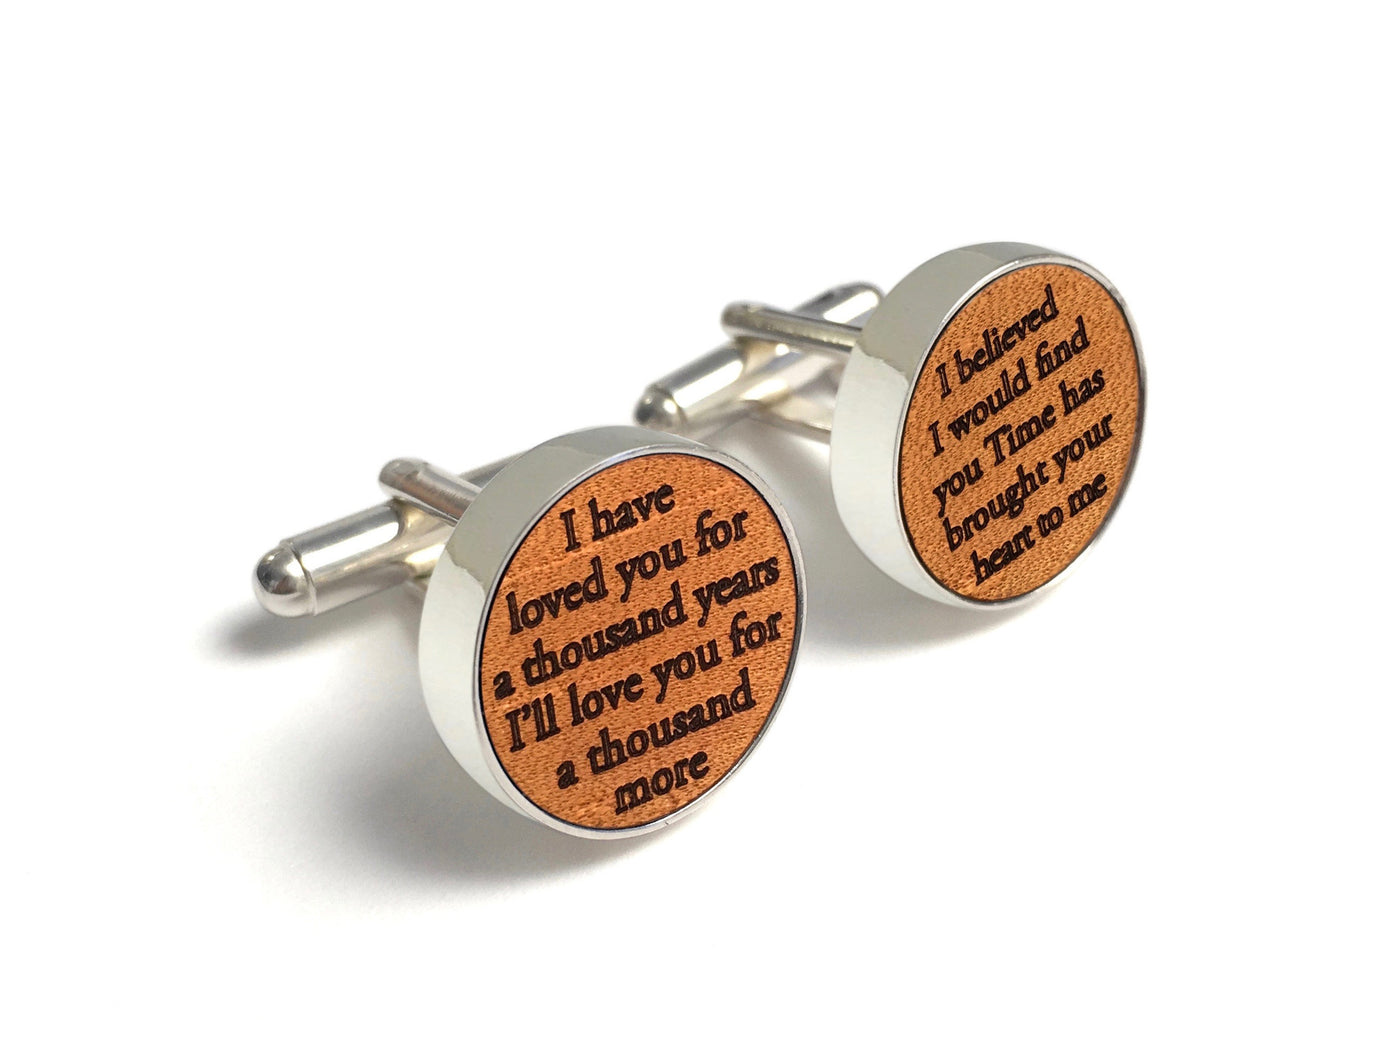 3 Year Anniversary Gifts For Him - Leather Cufflinks With Song